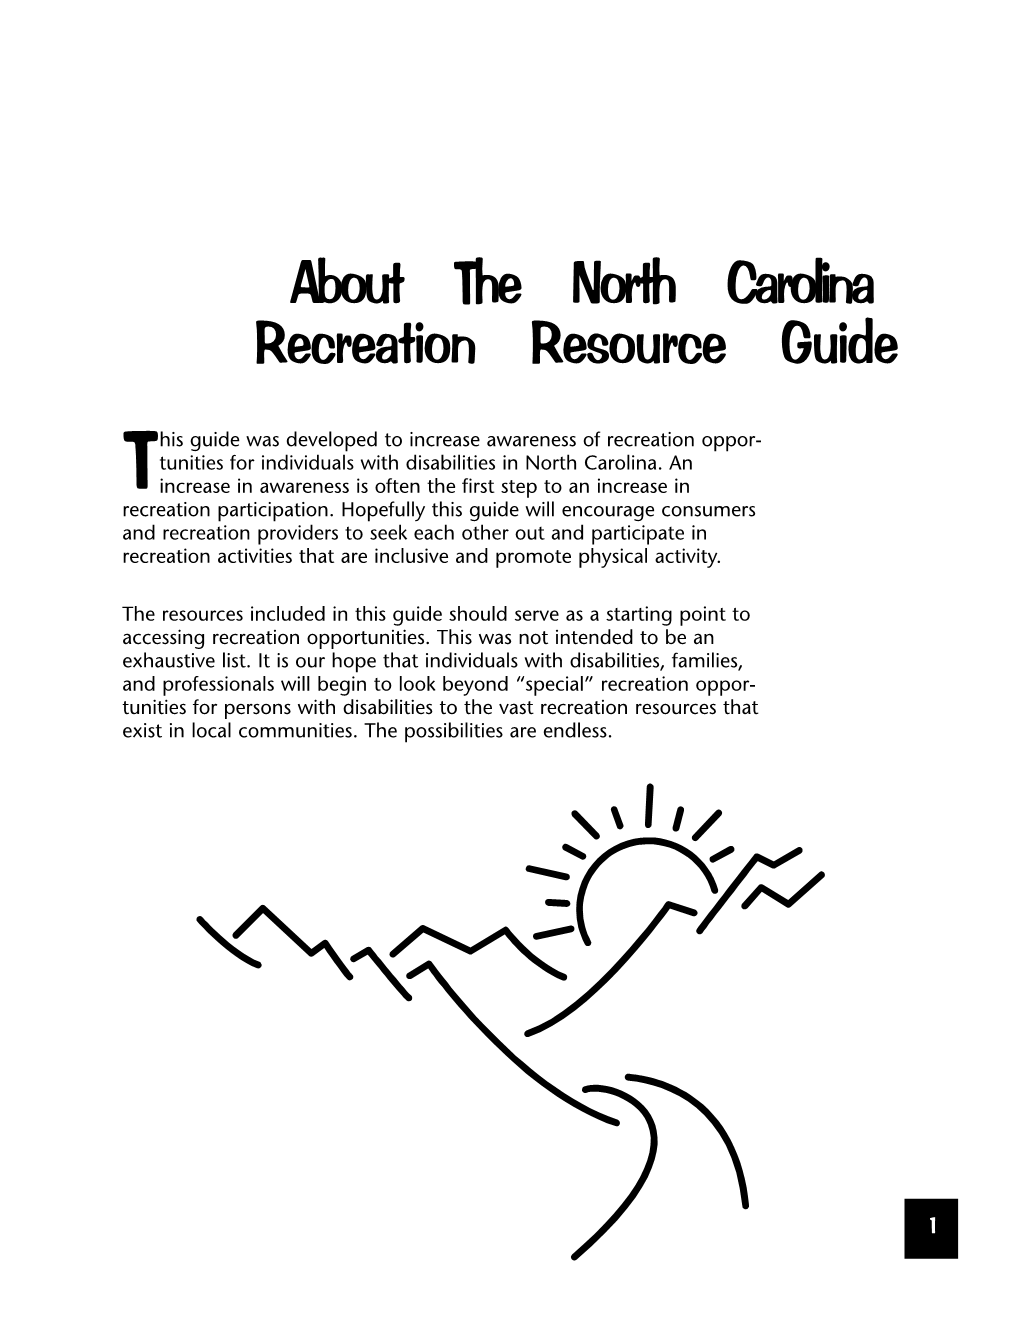 About the North Carolina Recreation Resource Guide